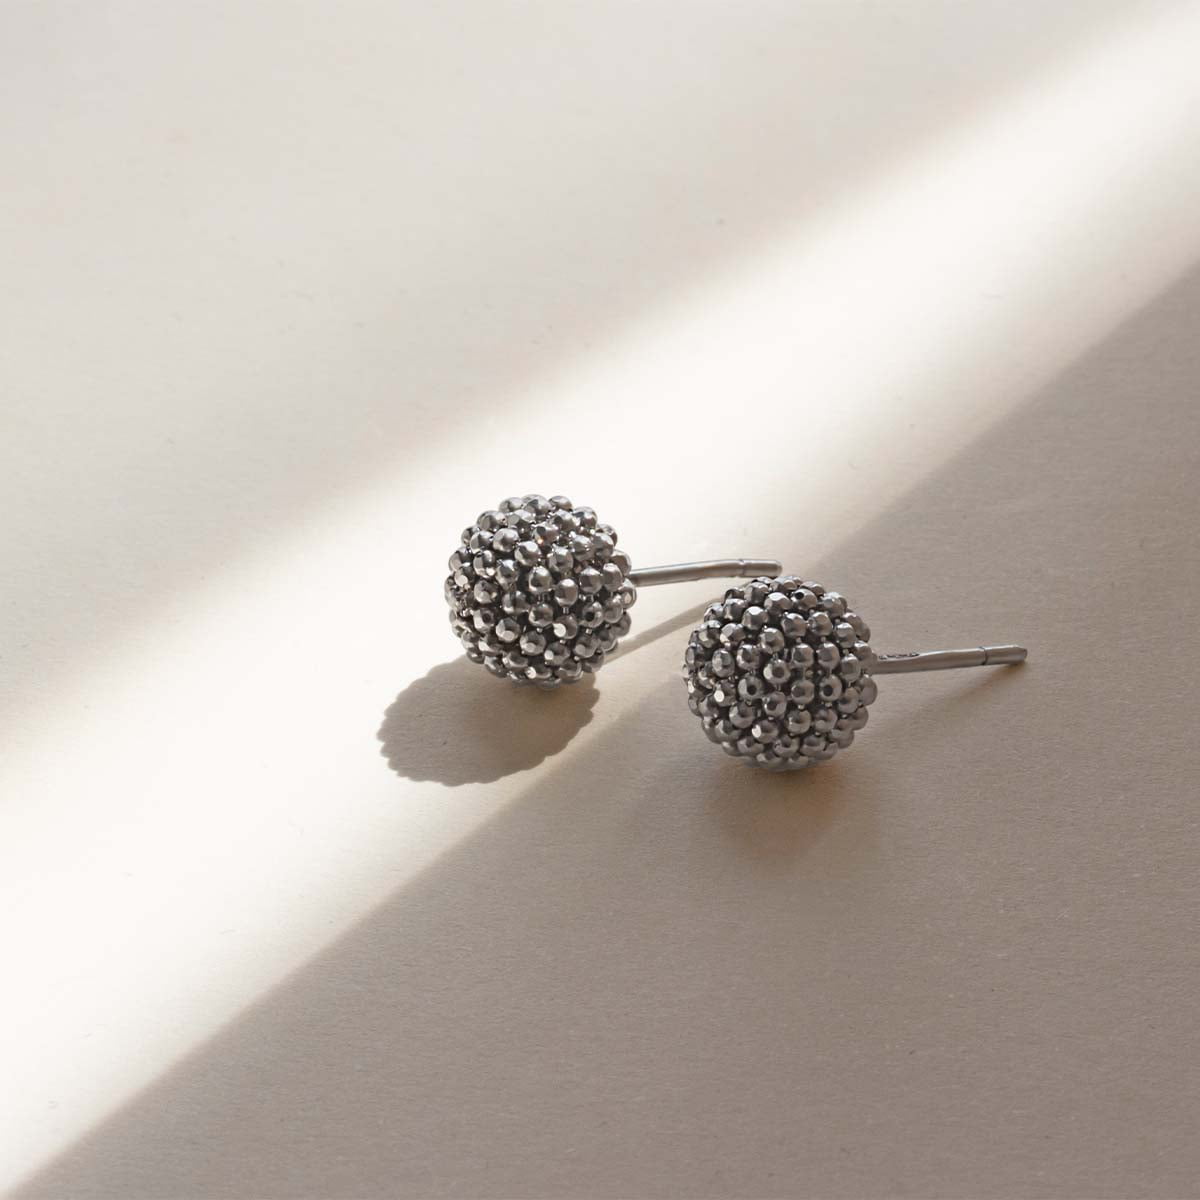 Auric Signature 18ct White Gold Ball Stud Earrings